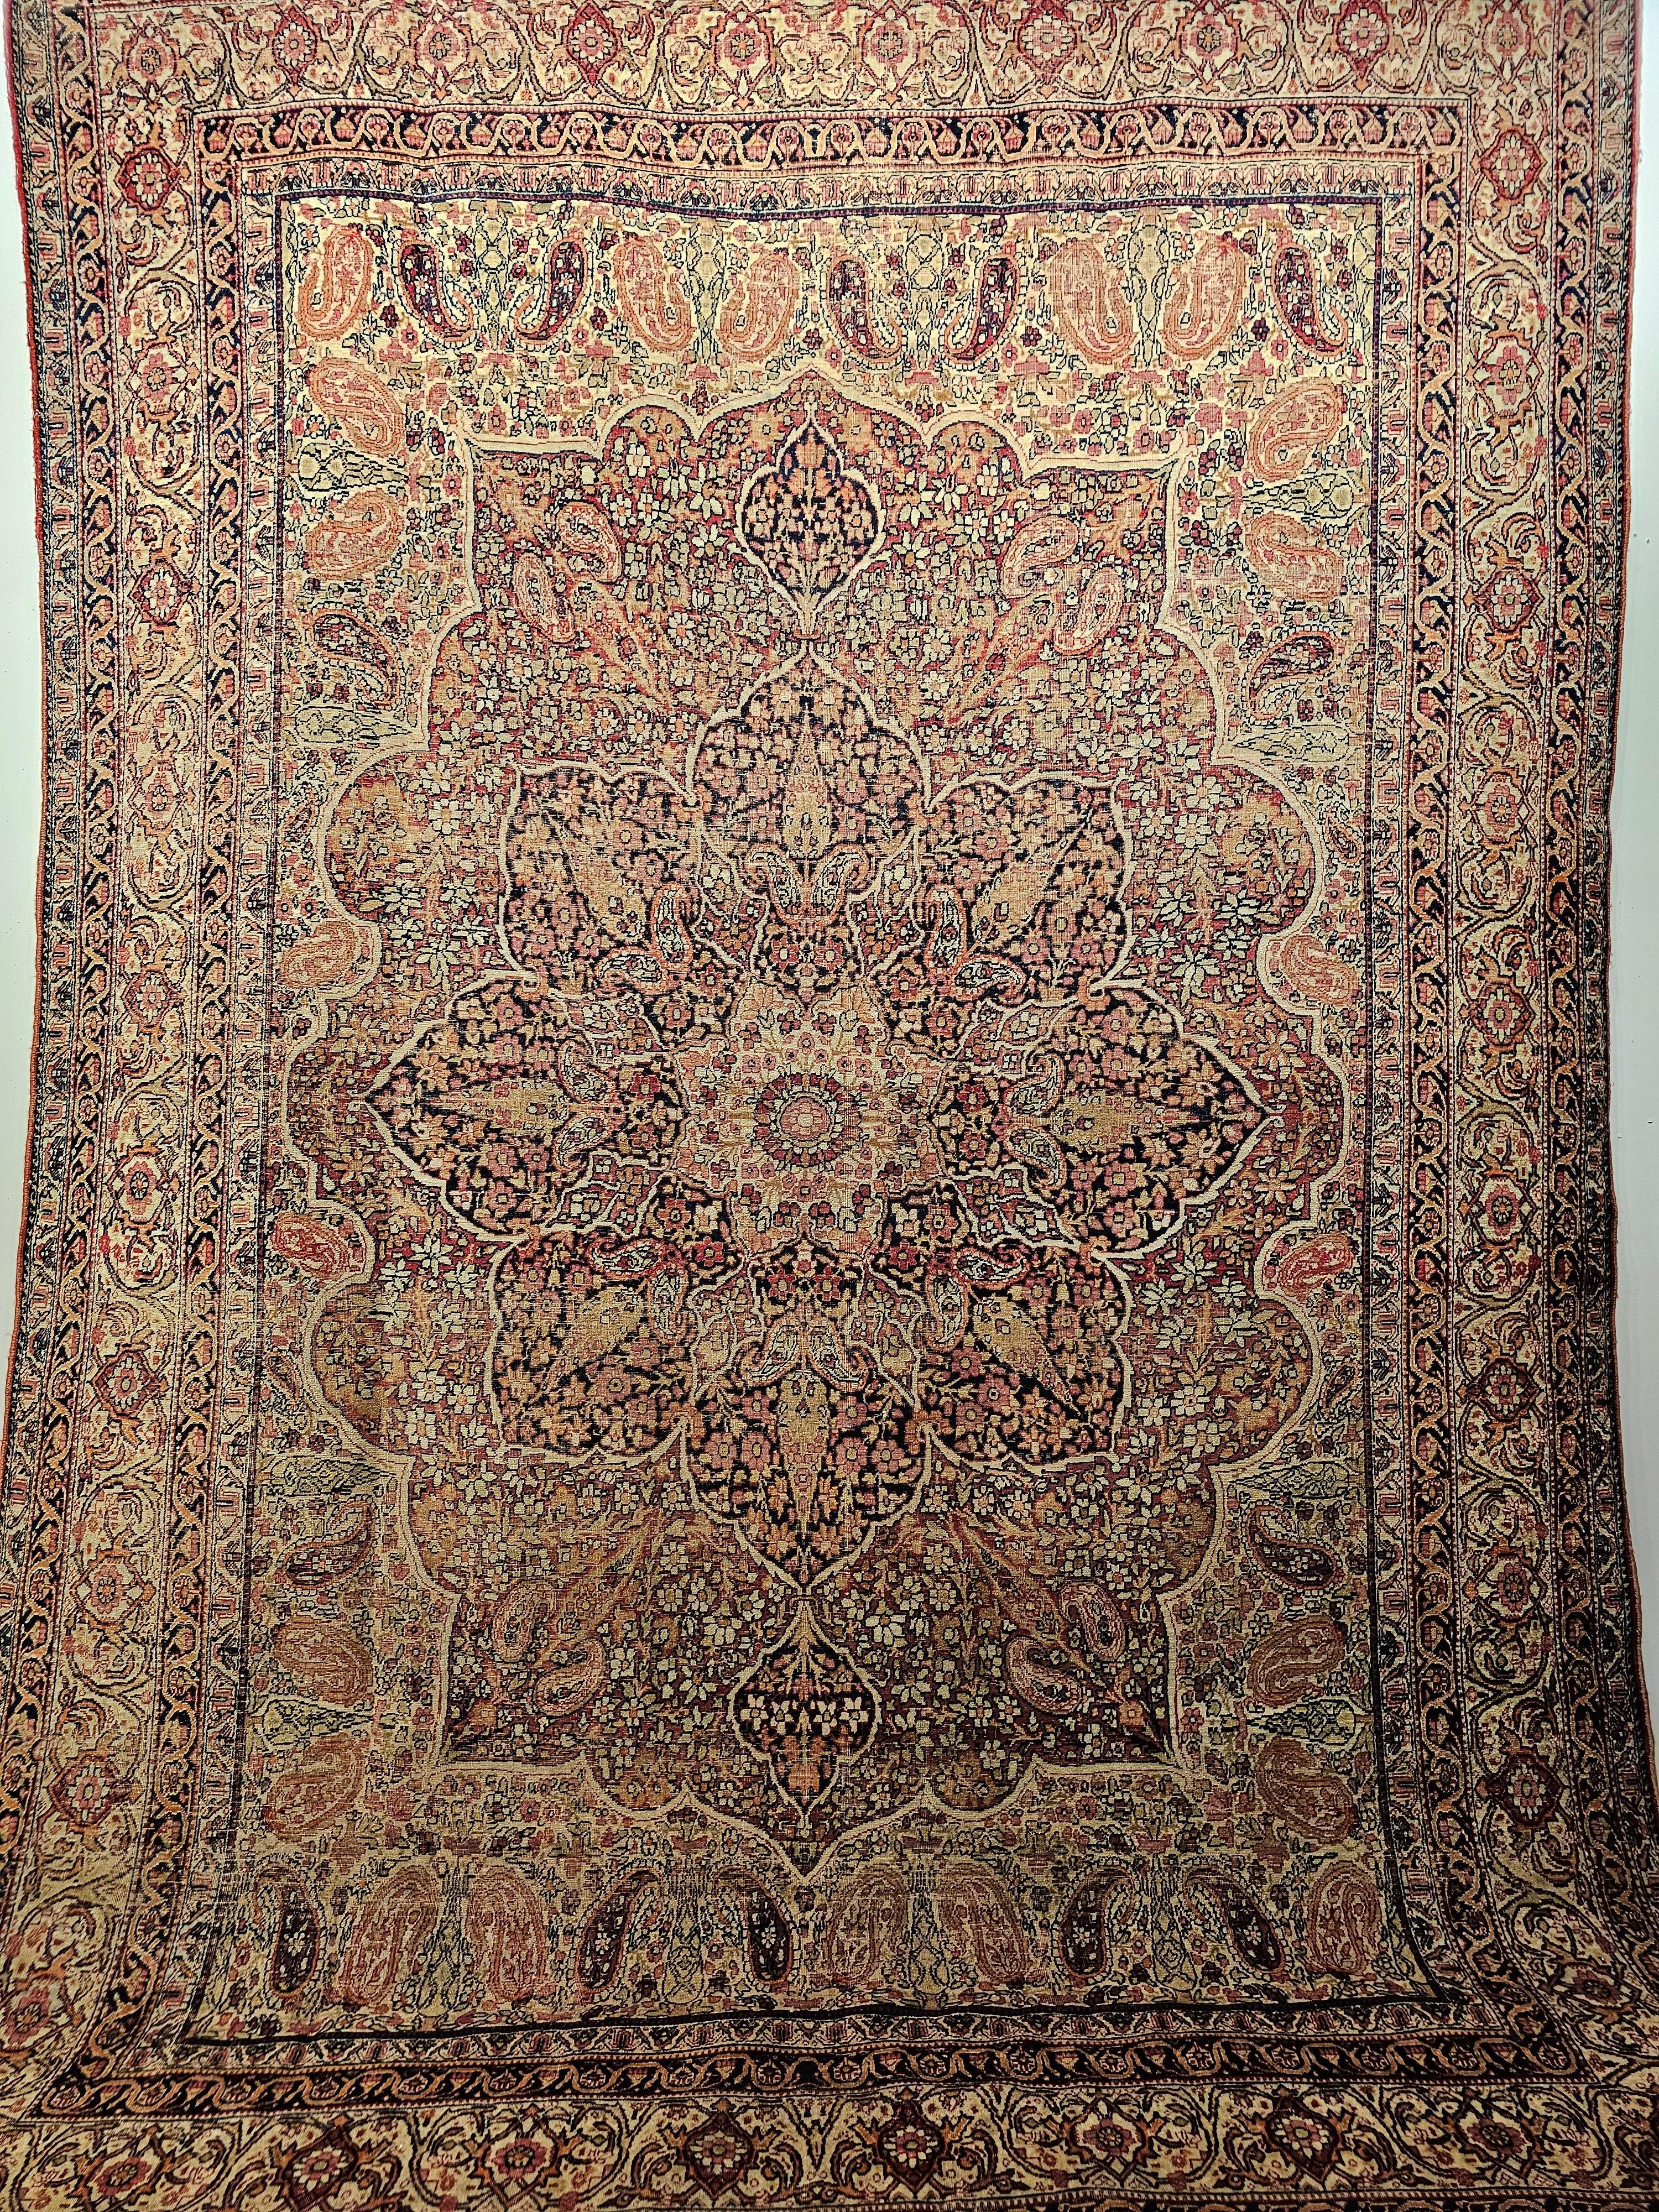 Late 19th century Persian Kerman Lavar room size rug in a floral and paisley design in ivory, red, pale yellow, and midnight blue colors.  The rug has a gorgeous design and wonderful color combination.  The rug has a central medallion in navy blue